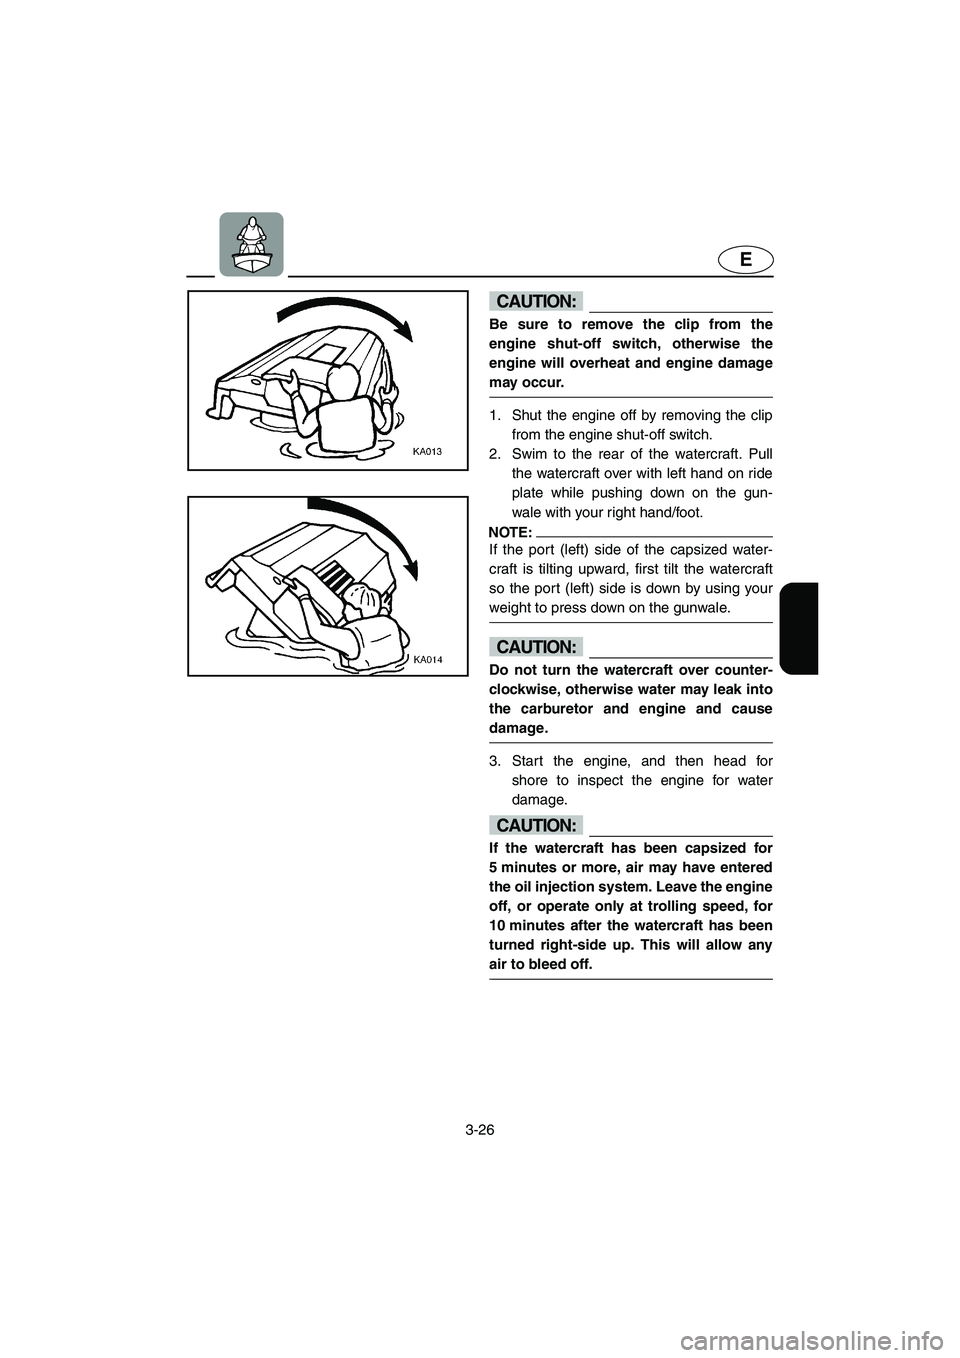 YAMAHA XL 700 2003  Owners Manual 3-26
E
CAUTION:@ Be sure to remove the clip from the
engine shut-off switch, otherwise the
engine will overheat and engine damage
may occur. 
@
1. Shut the engine off by removing the clip
from the eng